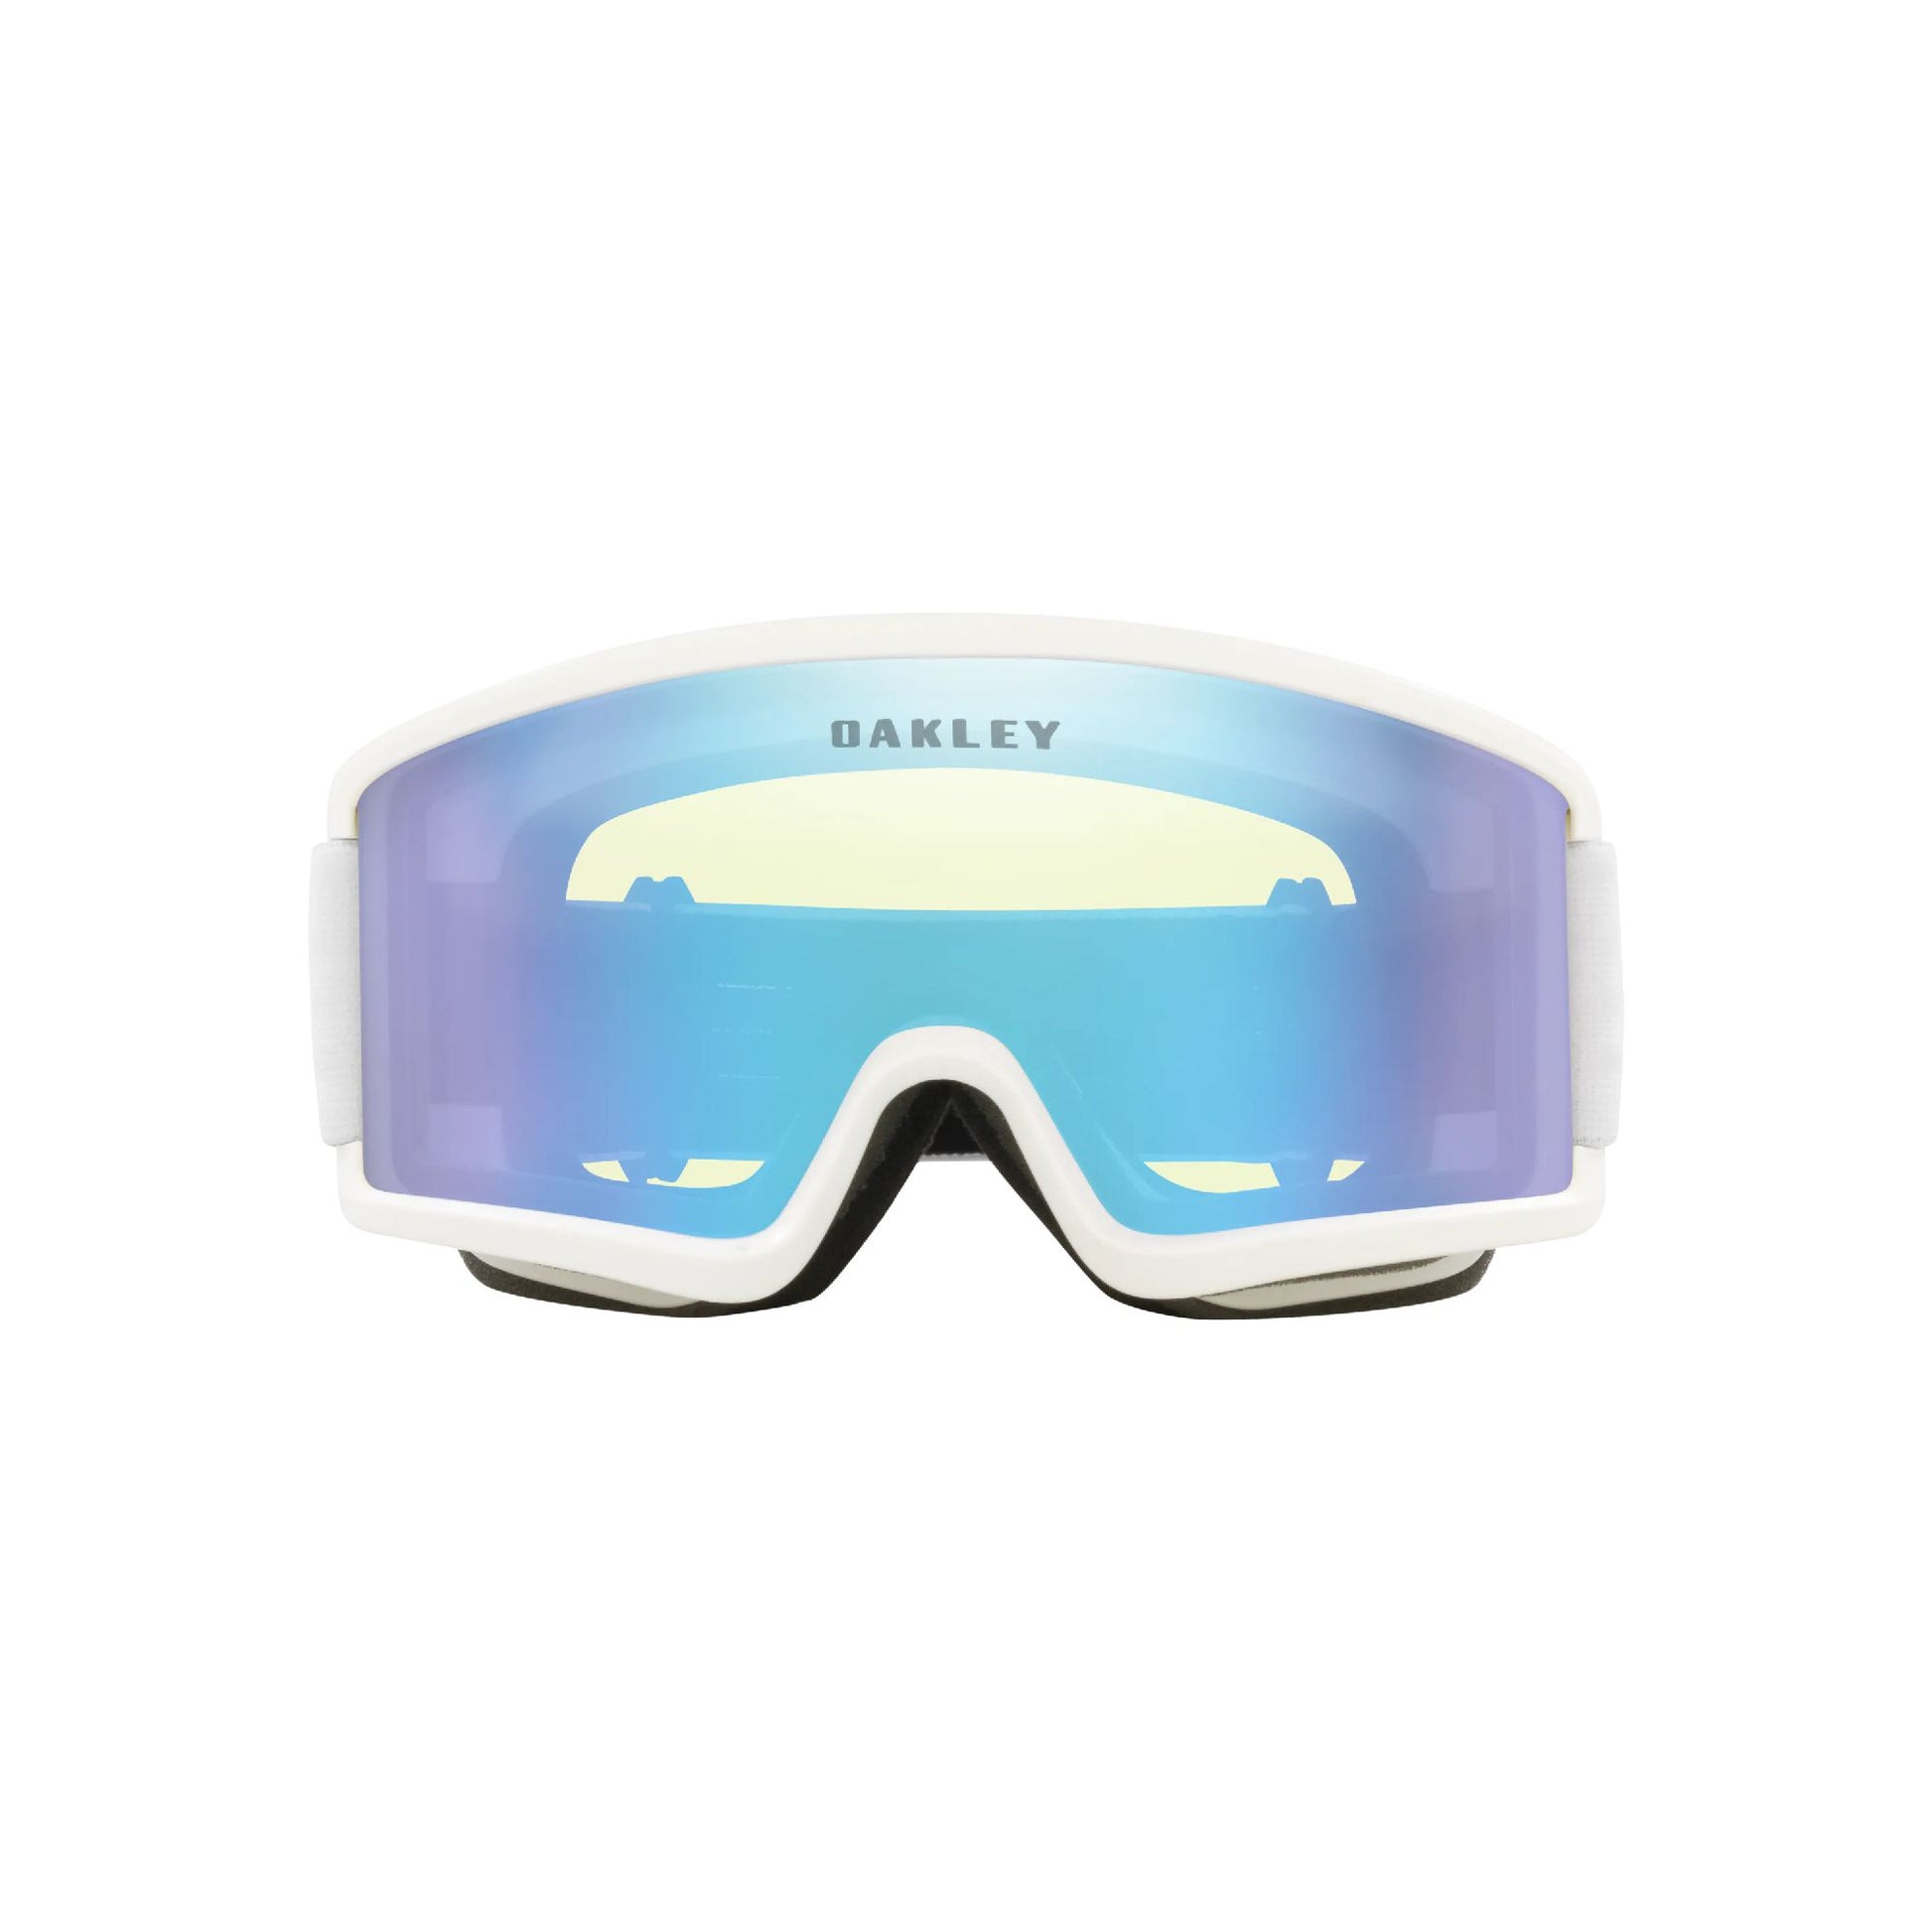 Oakley Youth Target Line S Snow Goggles Matte White Hi Yellow Snow Goggles